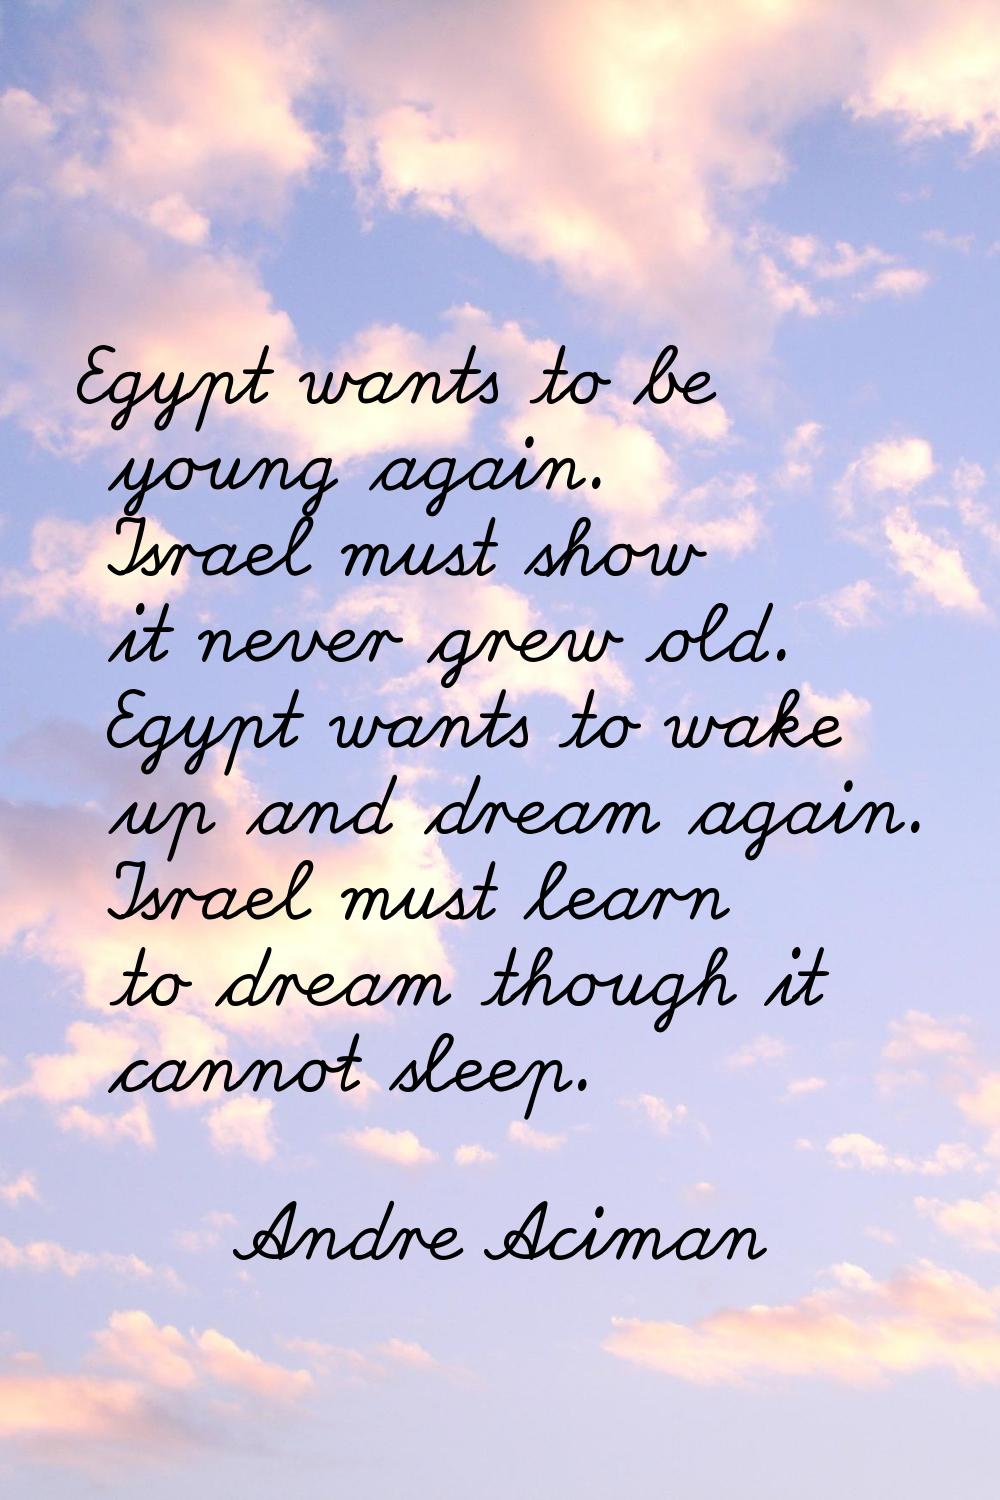 Egypt wants to be young again. Israel must show it never grew old. Egypt wants to wake up and dream